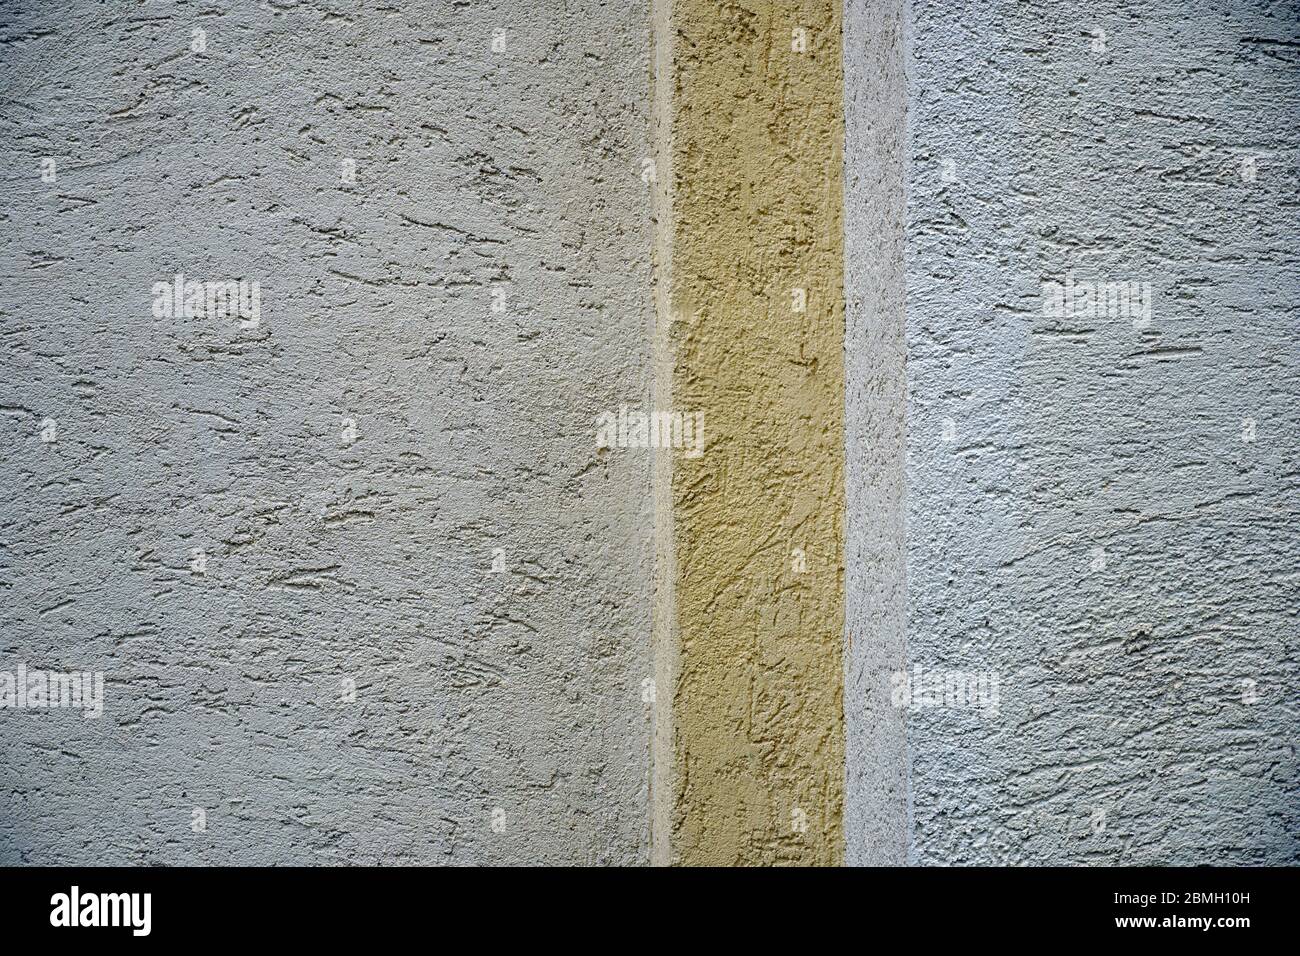 Concrete wall, lines and shapes architectural concept colour photography. Stock Photo